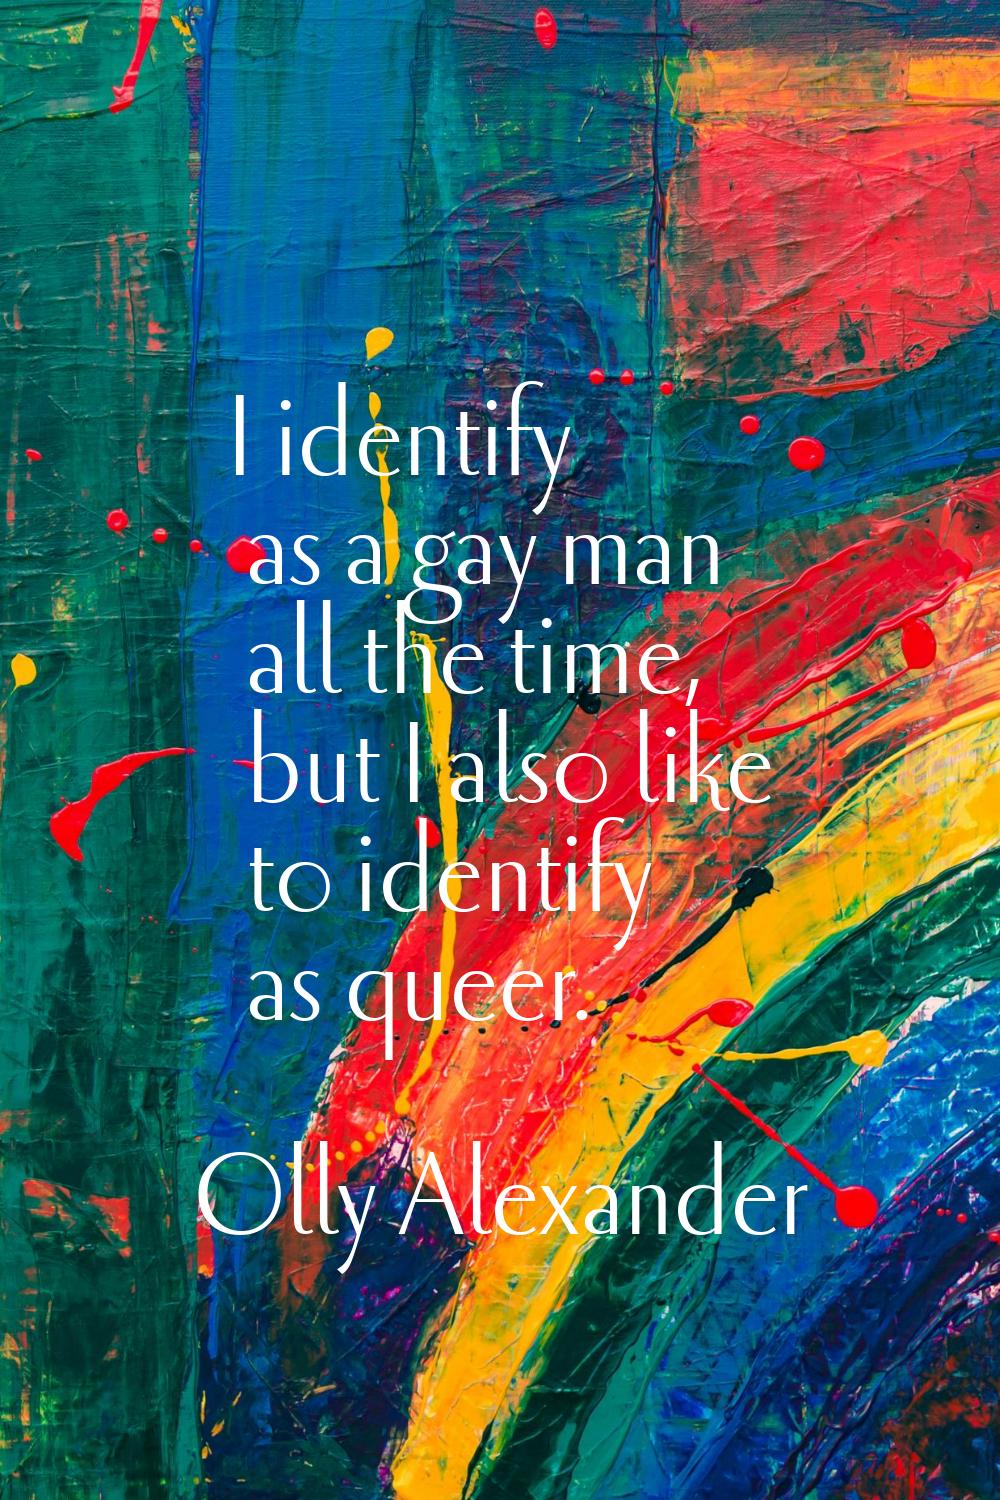 I identify as a gay man all the time, but I also like to identify as queer.